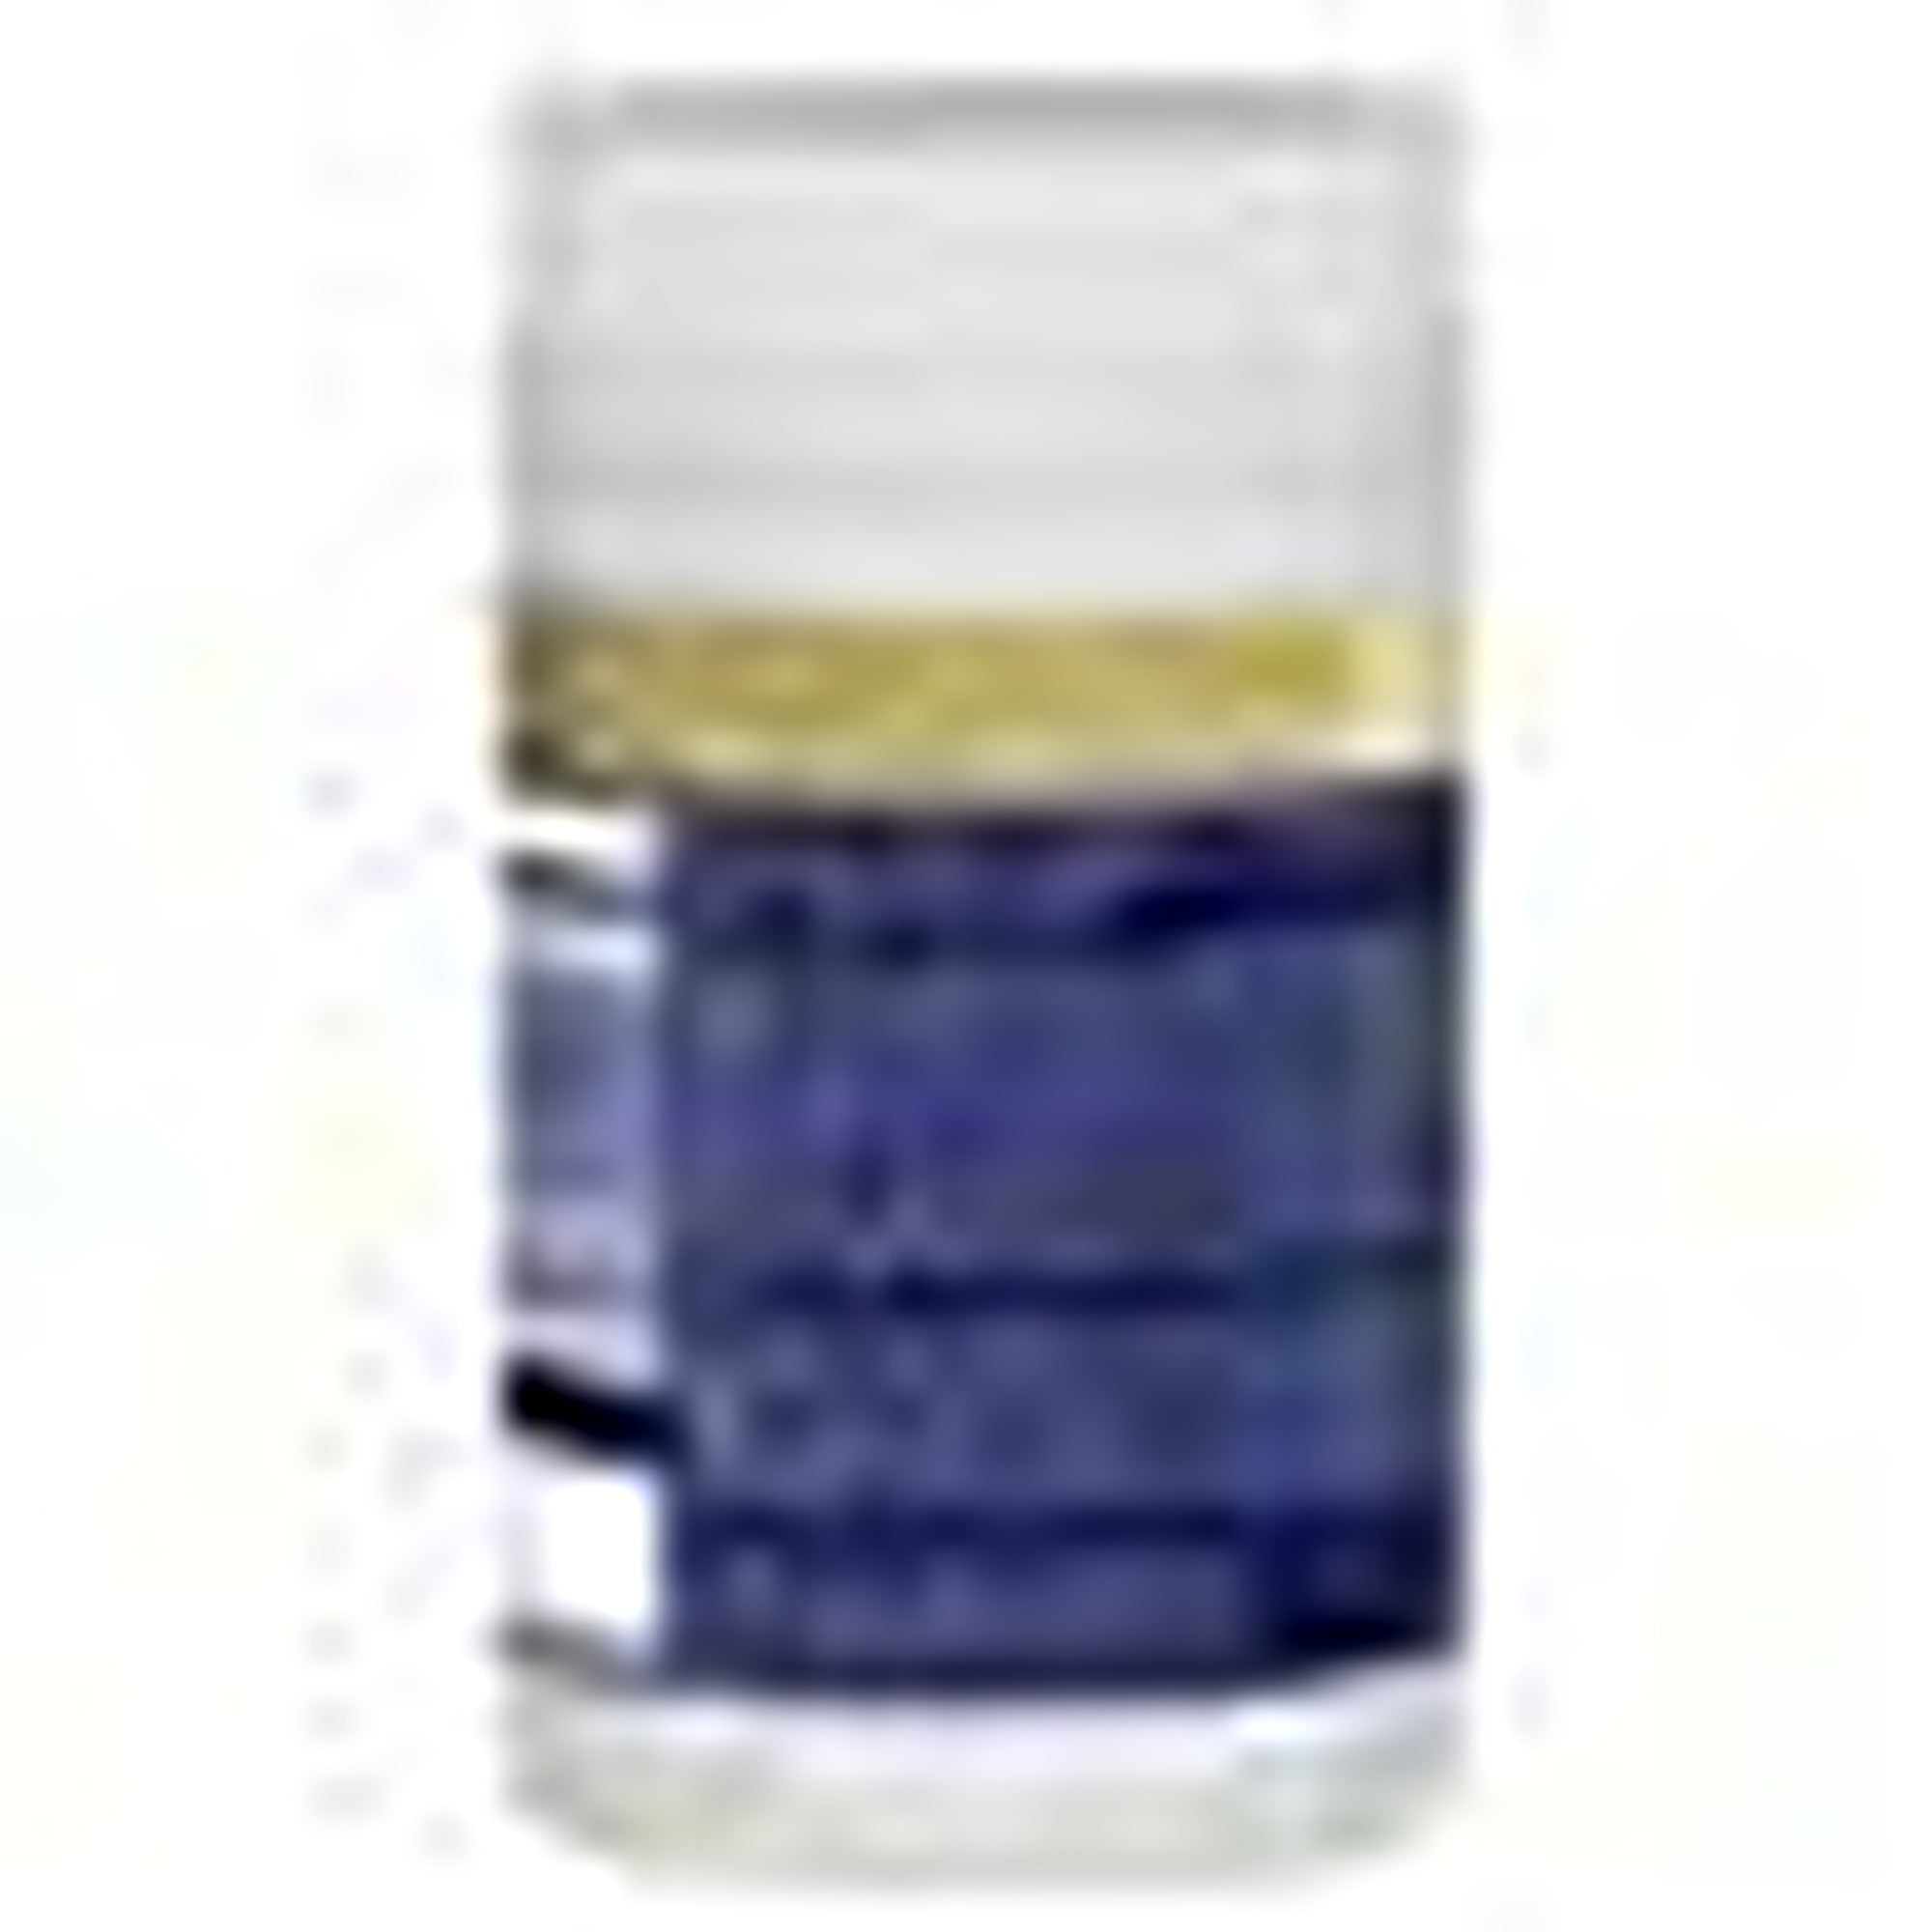 BioCeuticals AdvaCal Forte Tablets 90s